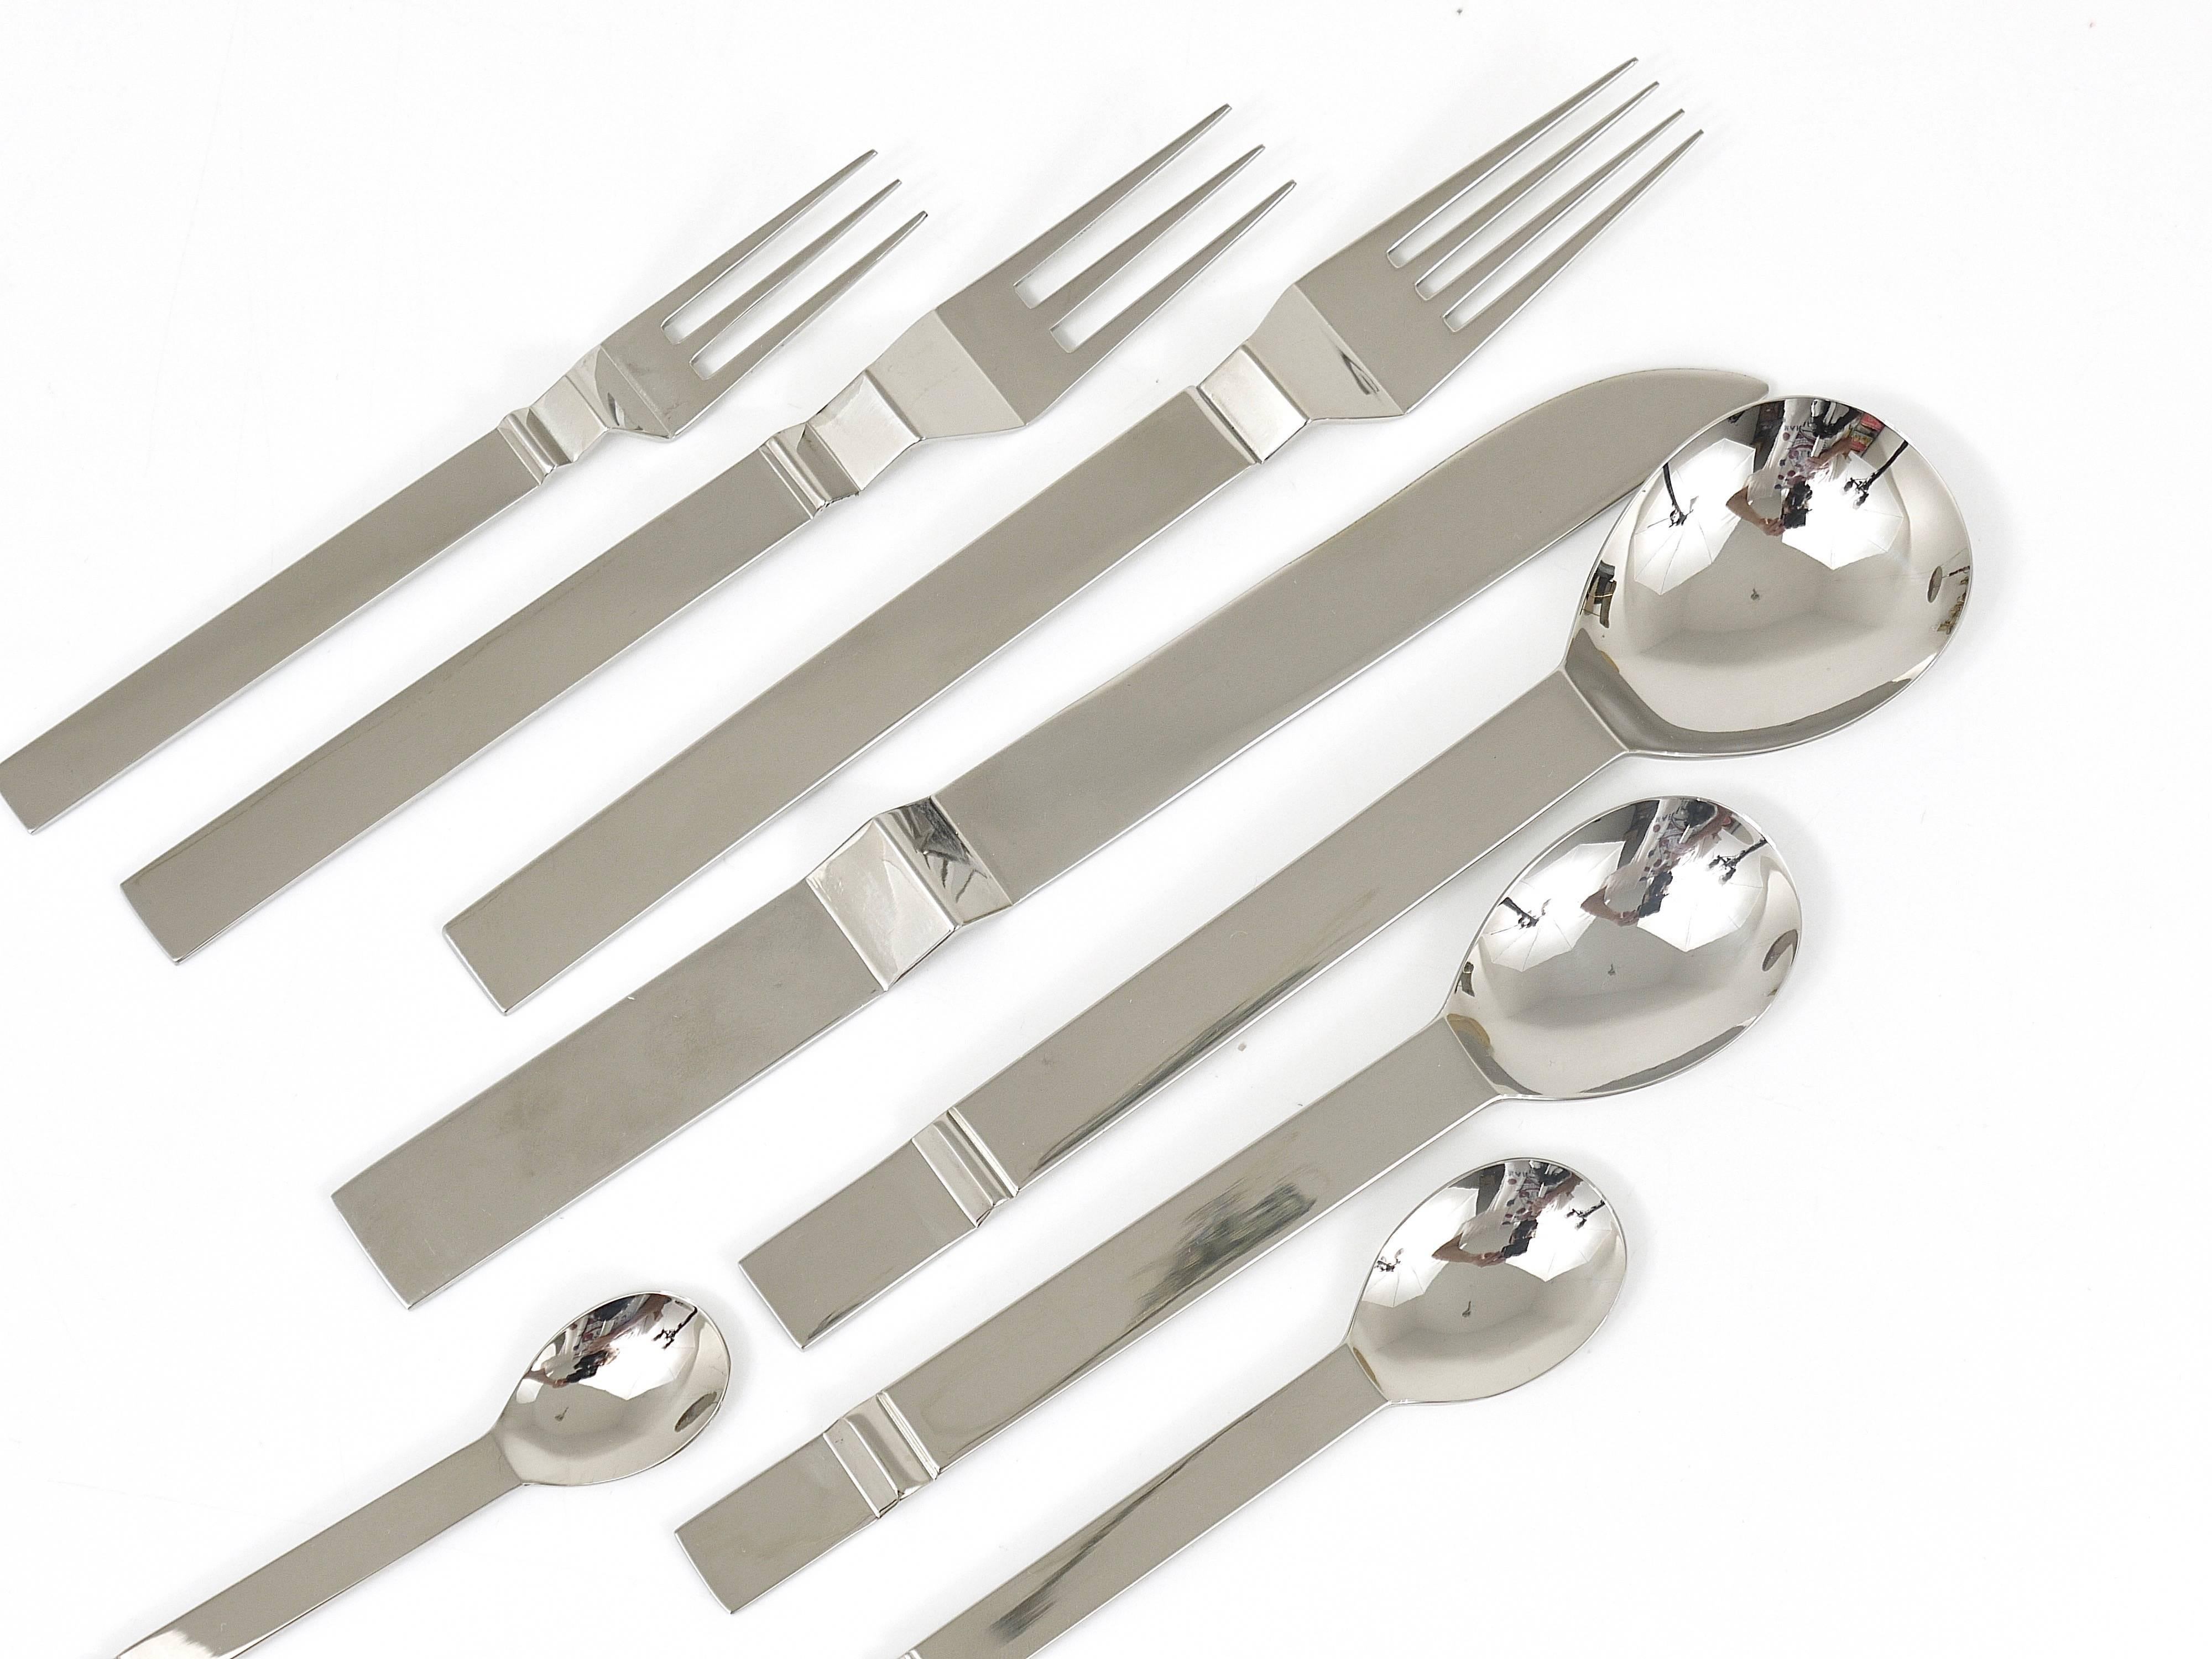 A comprehensive set of flatware, designed in the 1990s by Bob Patino (1942-1998) for Berndorf Austria. Beautiful and hard-to-find cutlery made of chrome-plated stainless steel, discontinued. 

We offer two identical sets for six persons each.